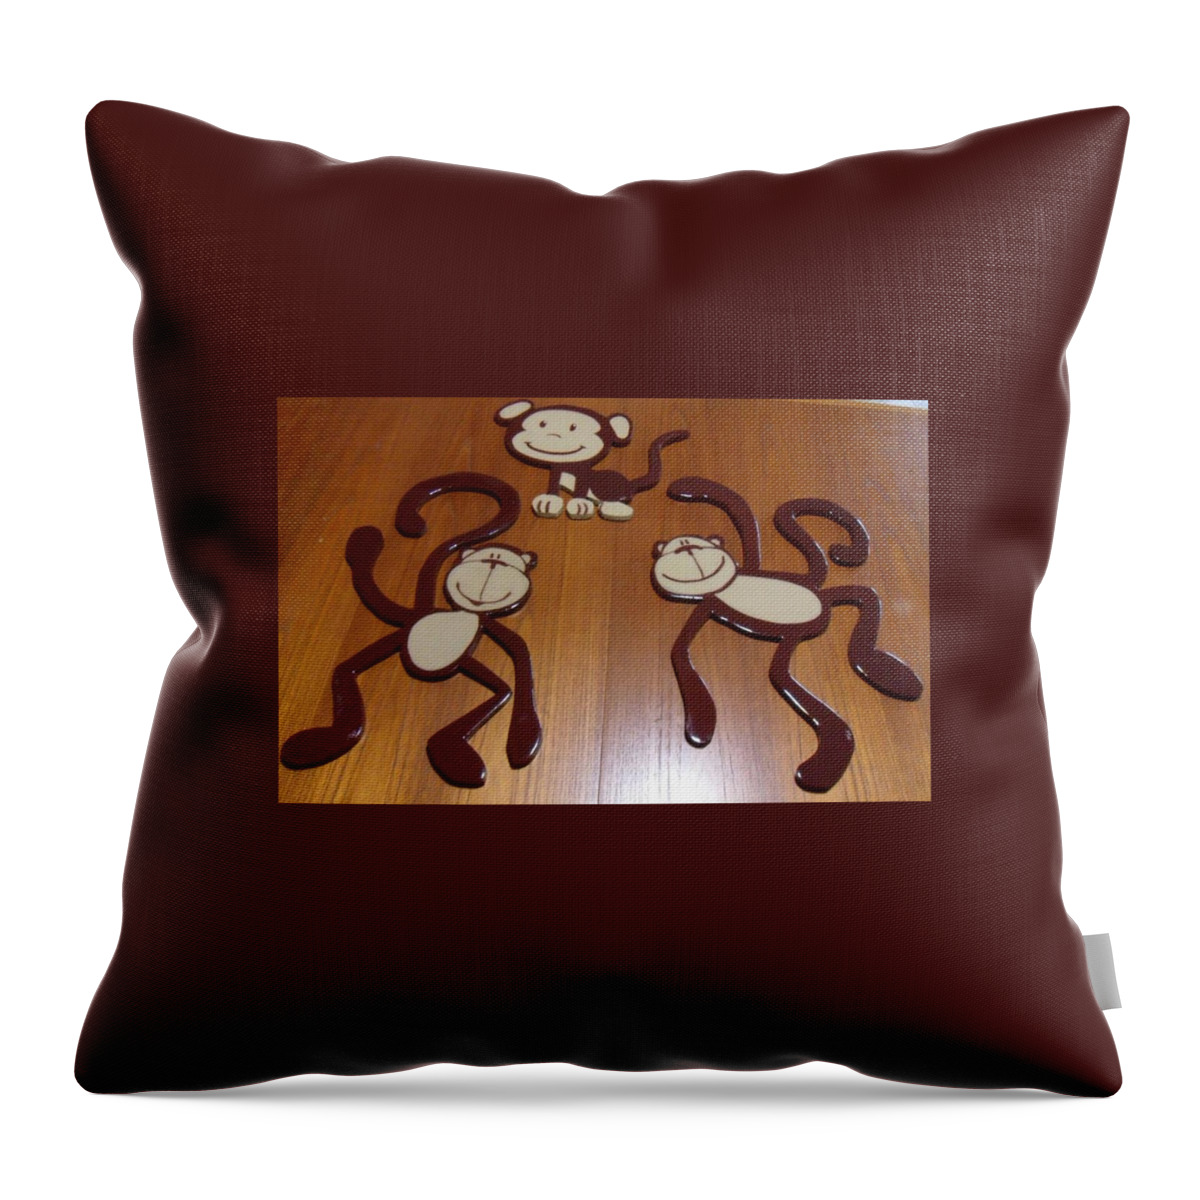 Monkeys Throw Pillow featuring the mixed media Monkeys by Val Oconnor